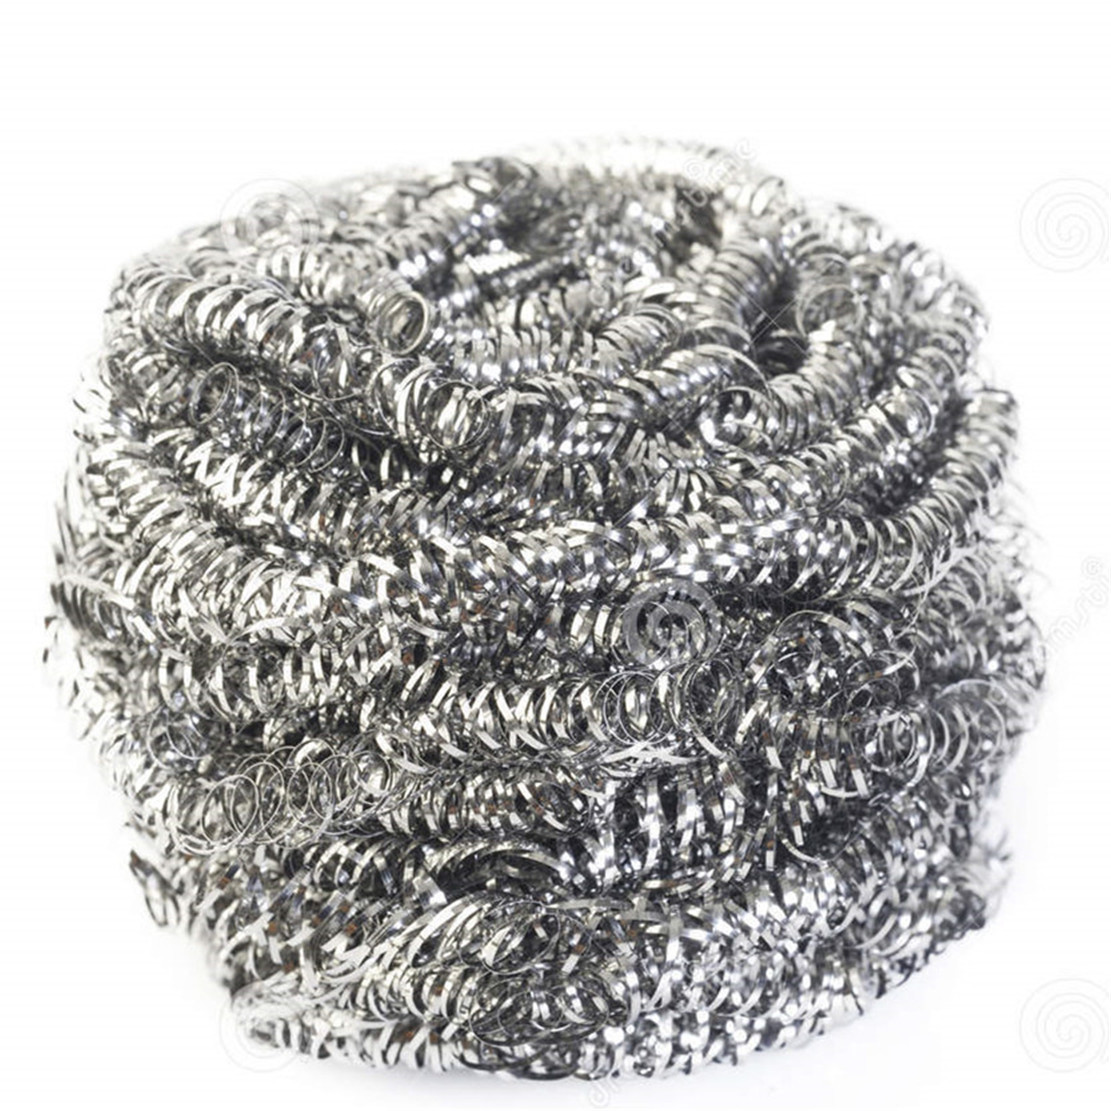  50g Cleaning Metal Stainless Steel Scrubbers Wire Ball|stainless steel pot cleaner Manufactures